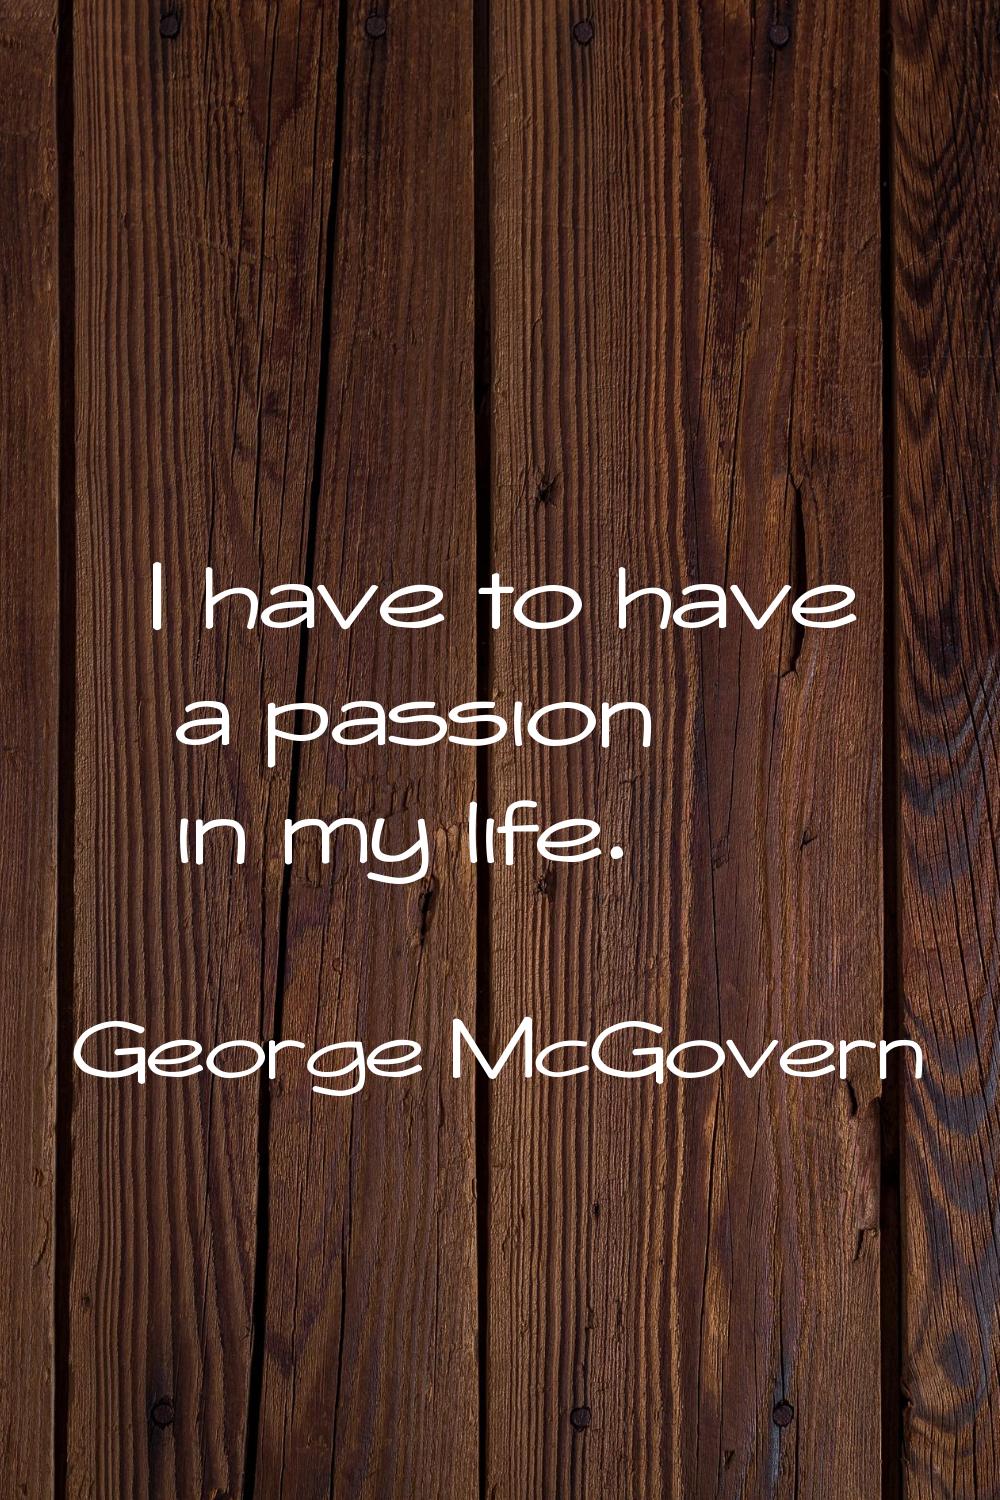 I have to have a passion in my life.